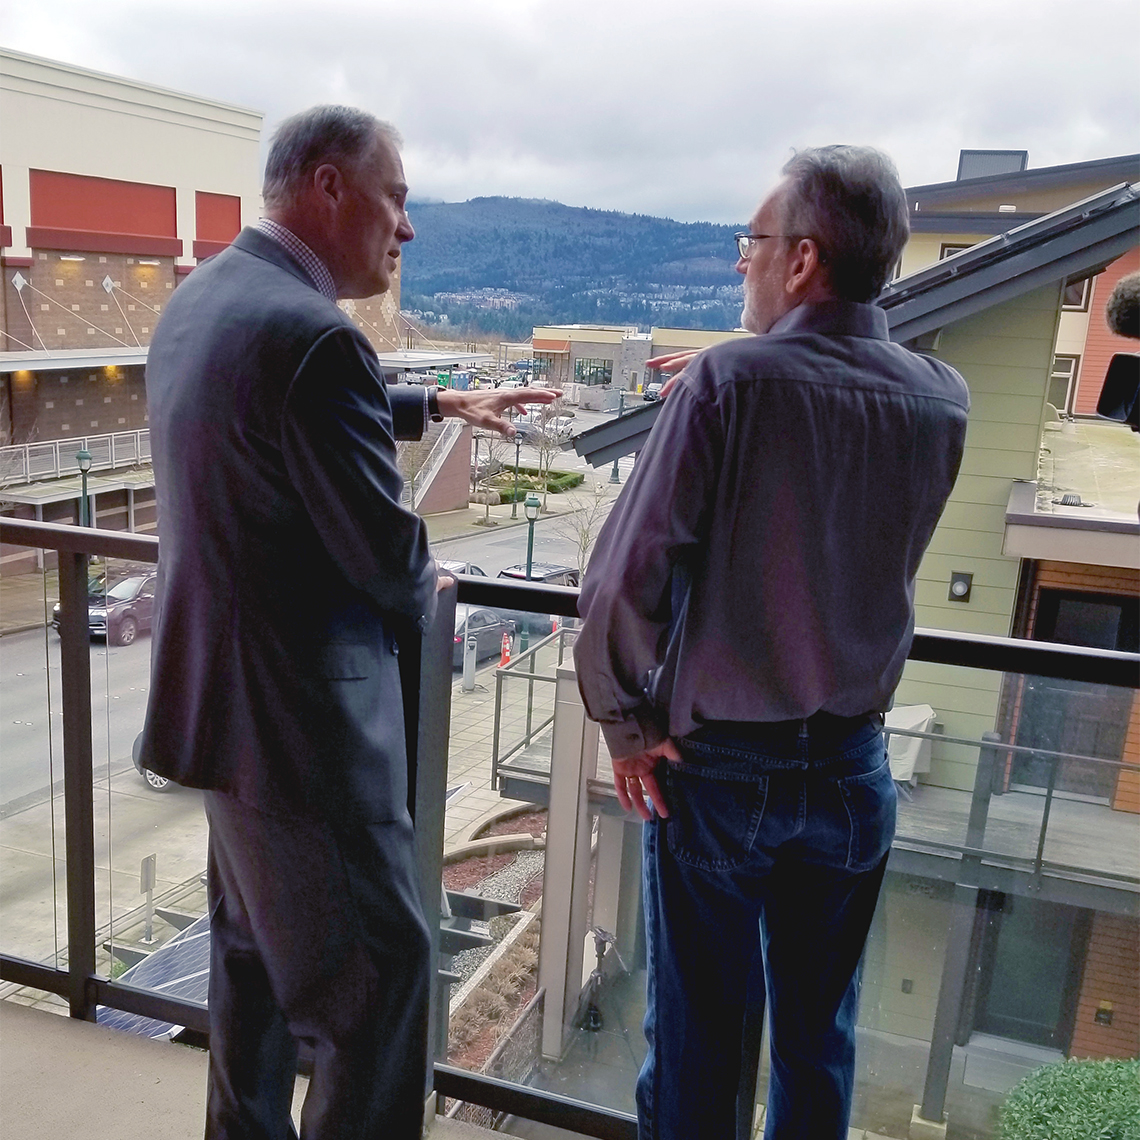 On our top-level deck discussing solar panels and microinverters